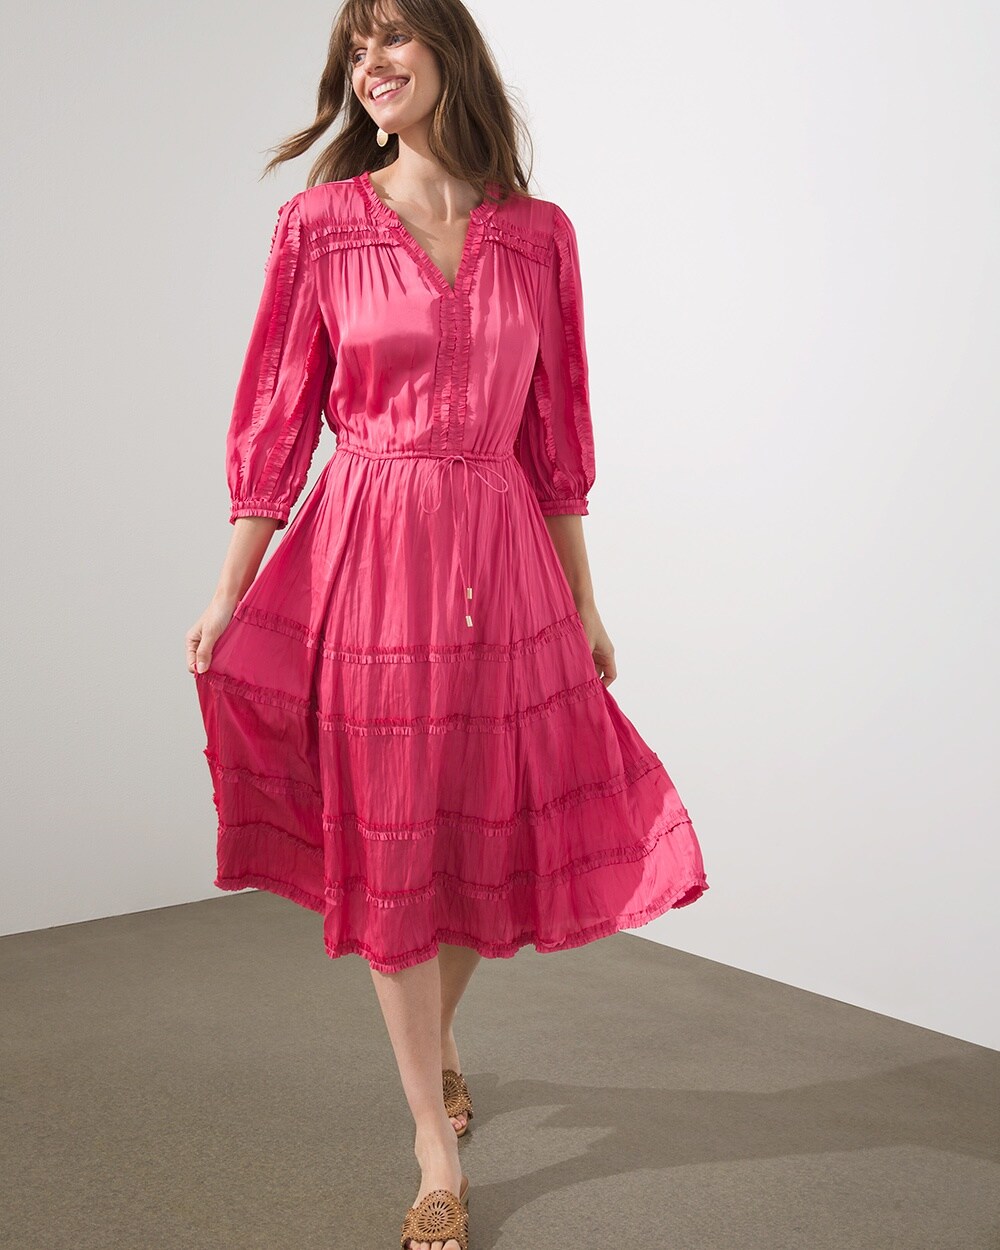 Tiered Ruffles Tie Waist Midi Dress video preview image, click to start video